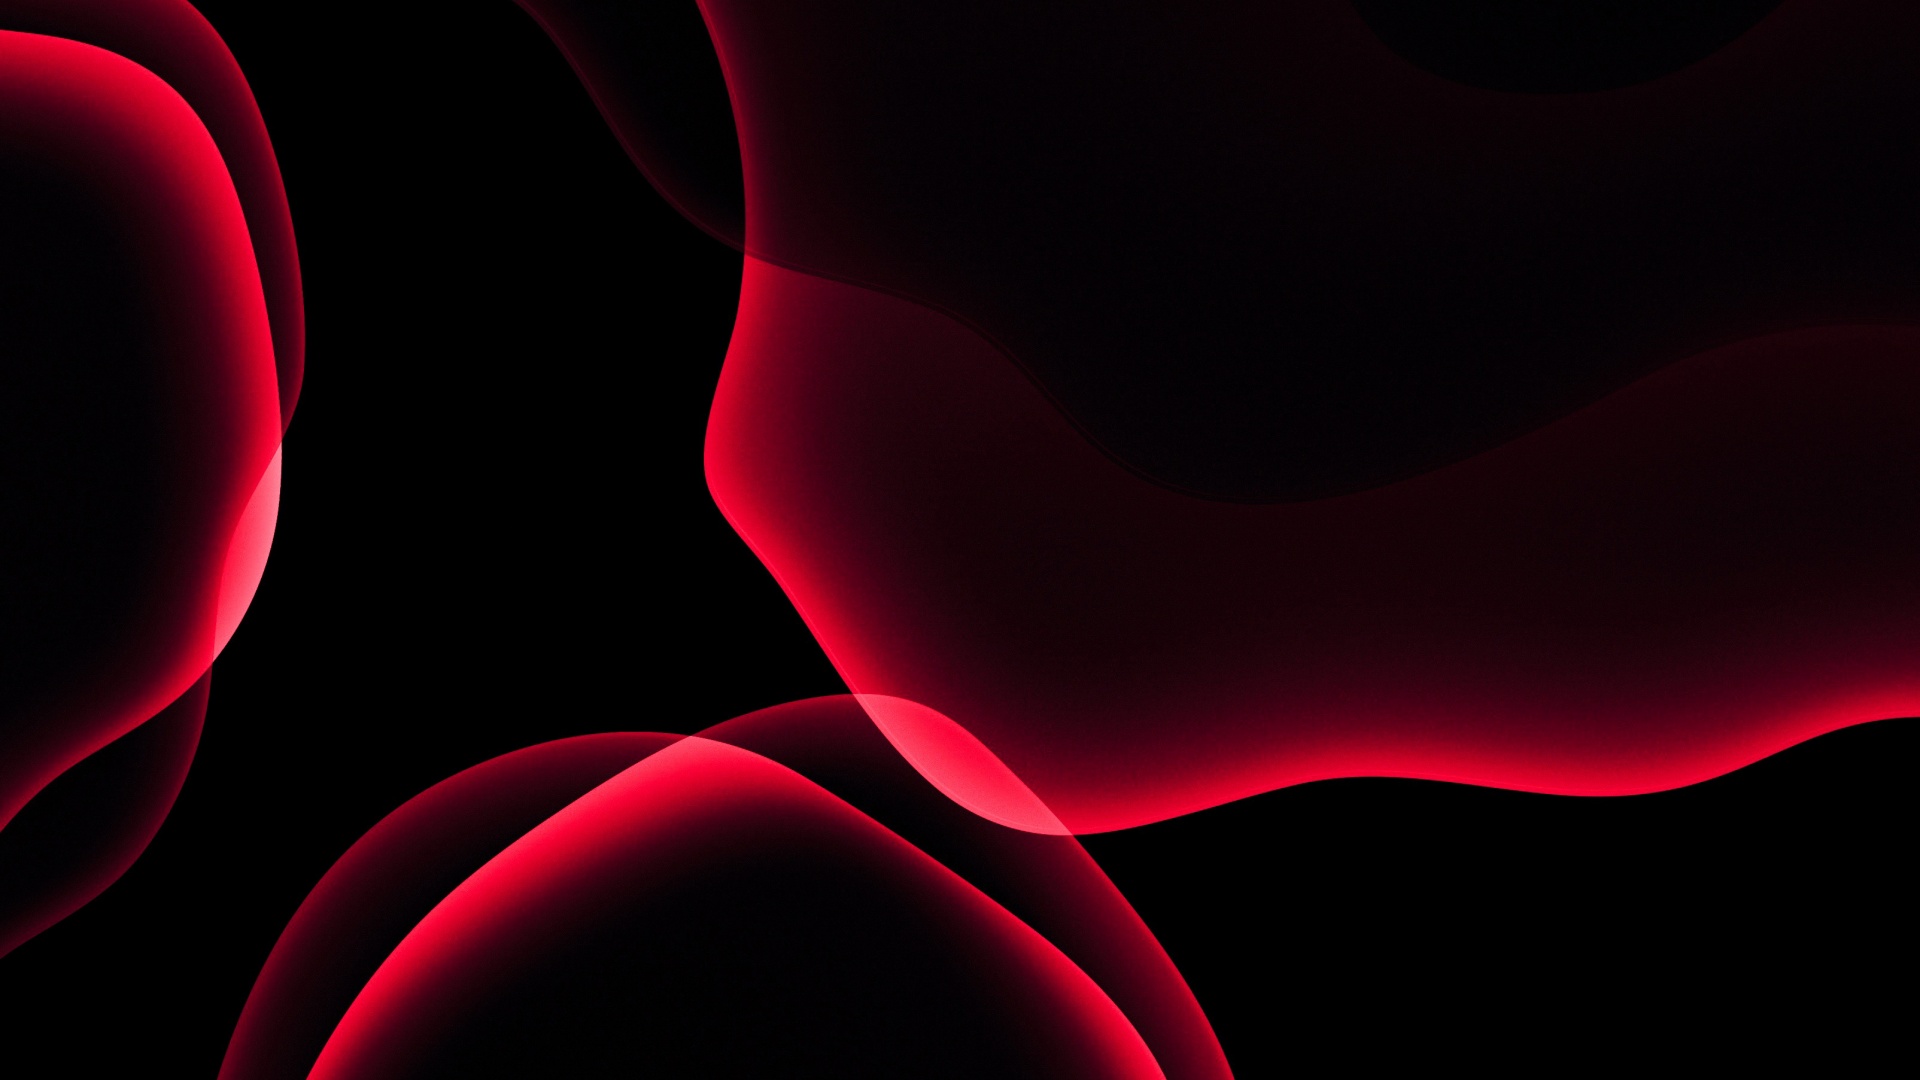 Ios 13 Wallpaper 4k Stock Ipados Red Black Background Amoled Hd Abstract 799